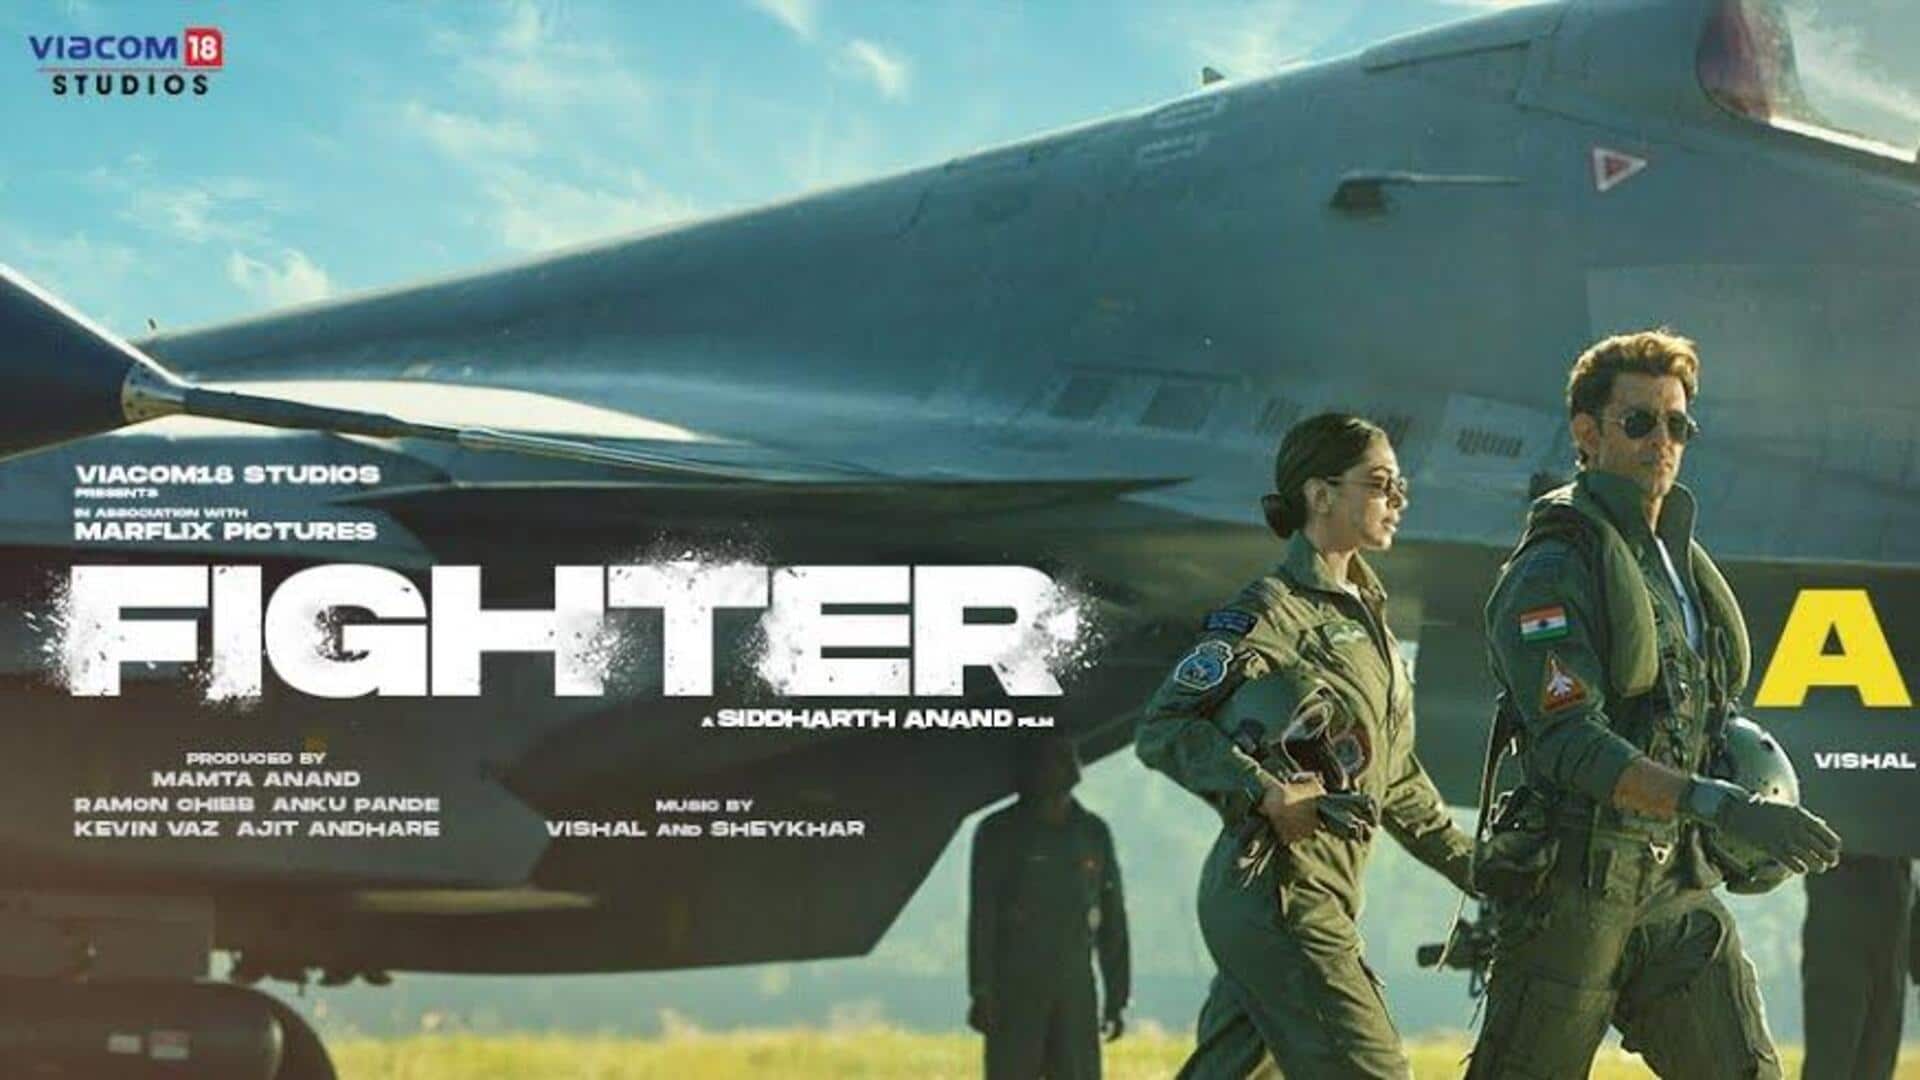 Box office collection: 'Fighter' aims to shift gears over weekend